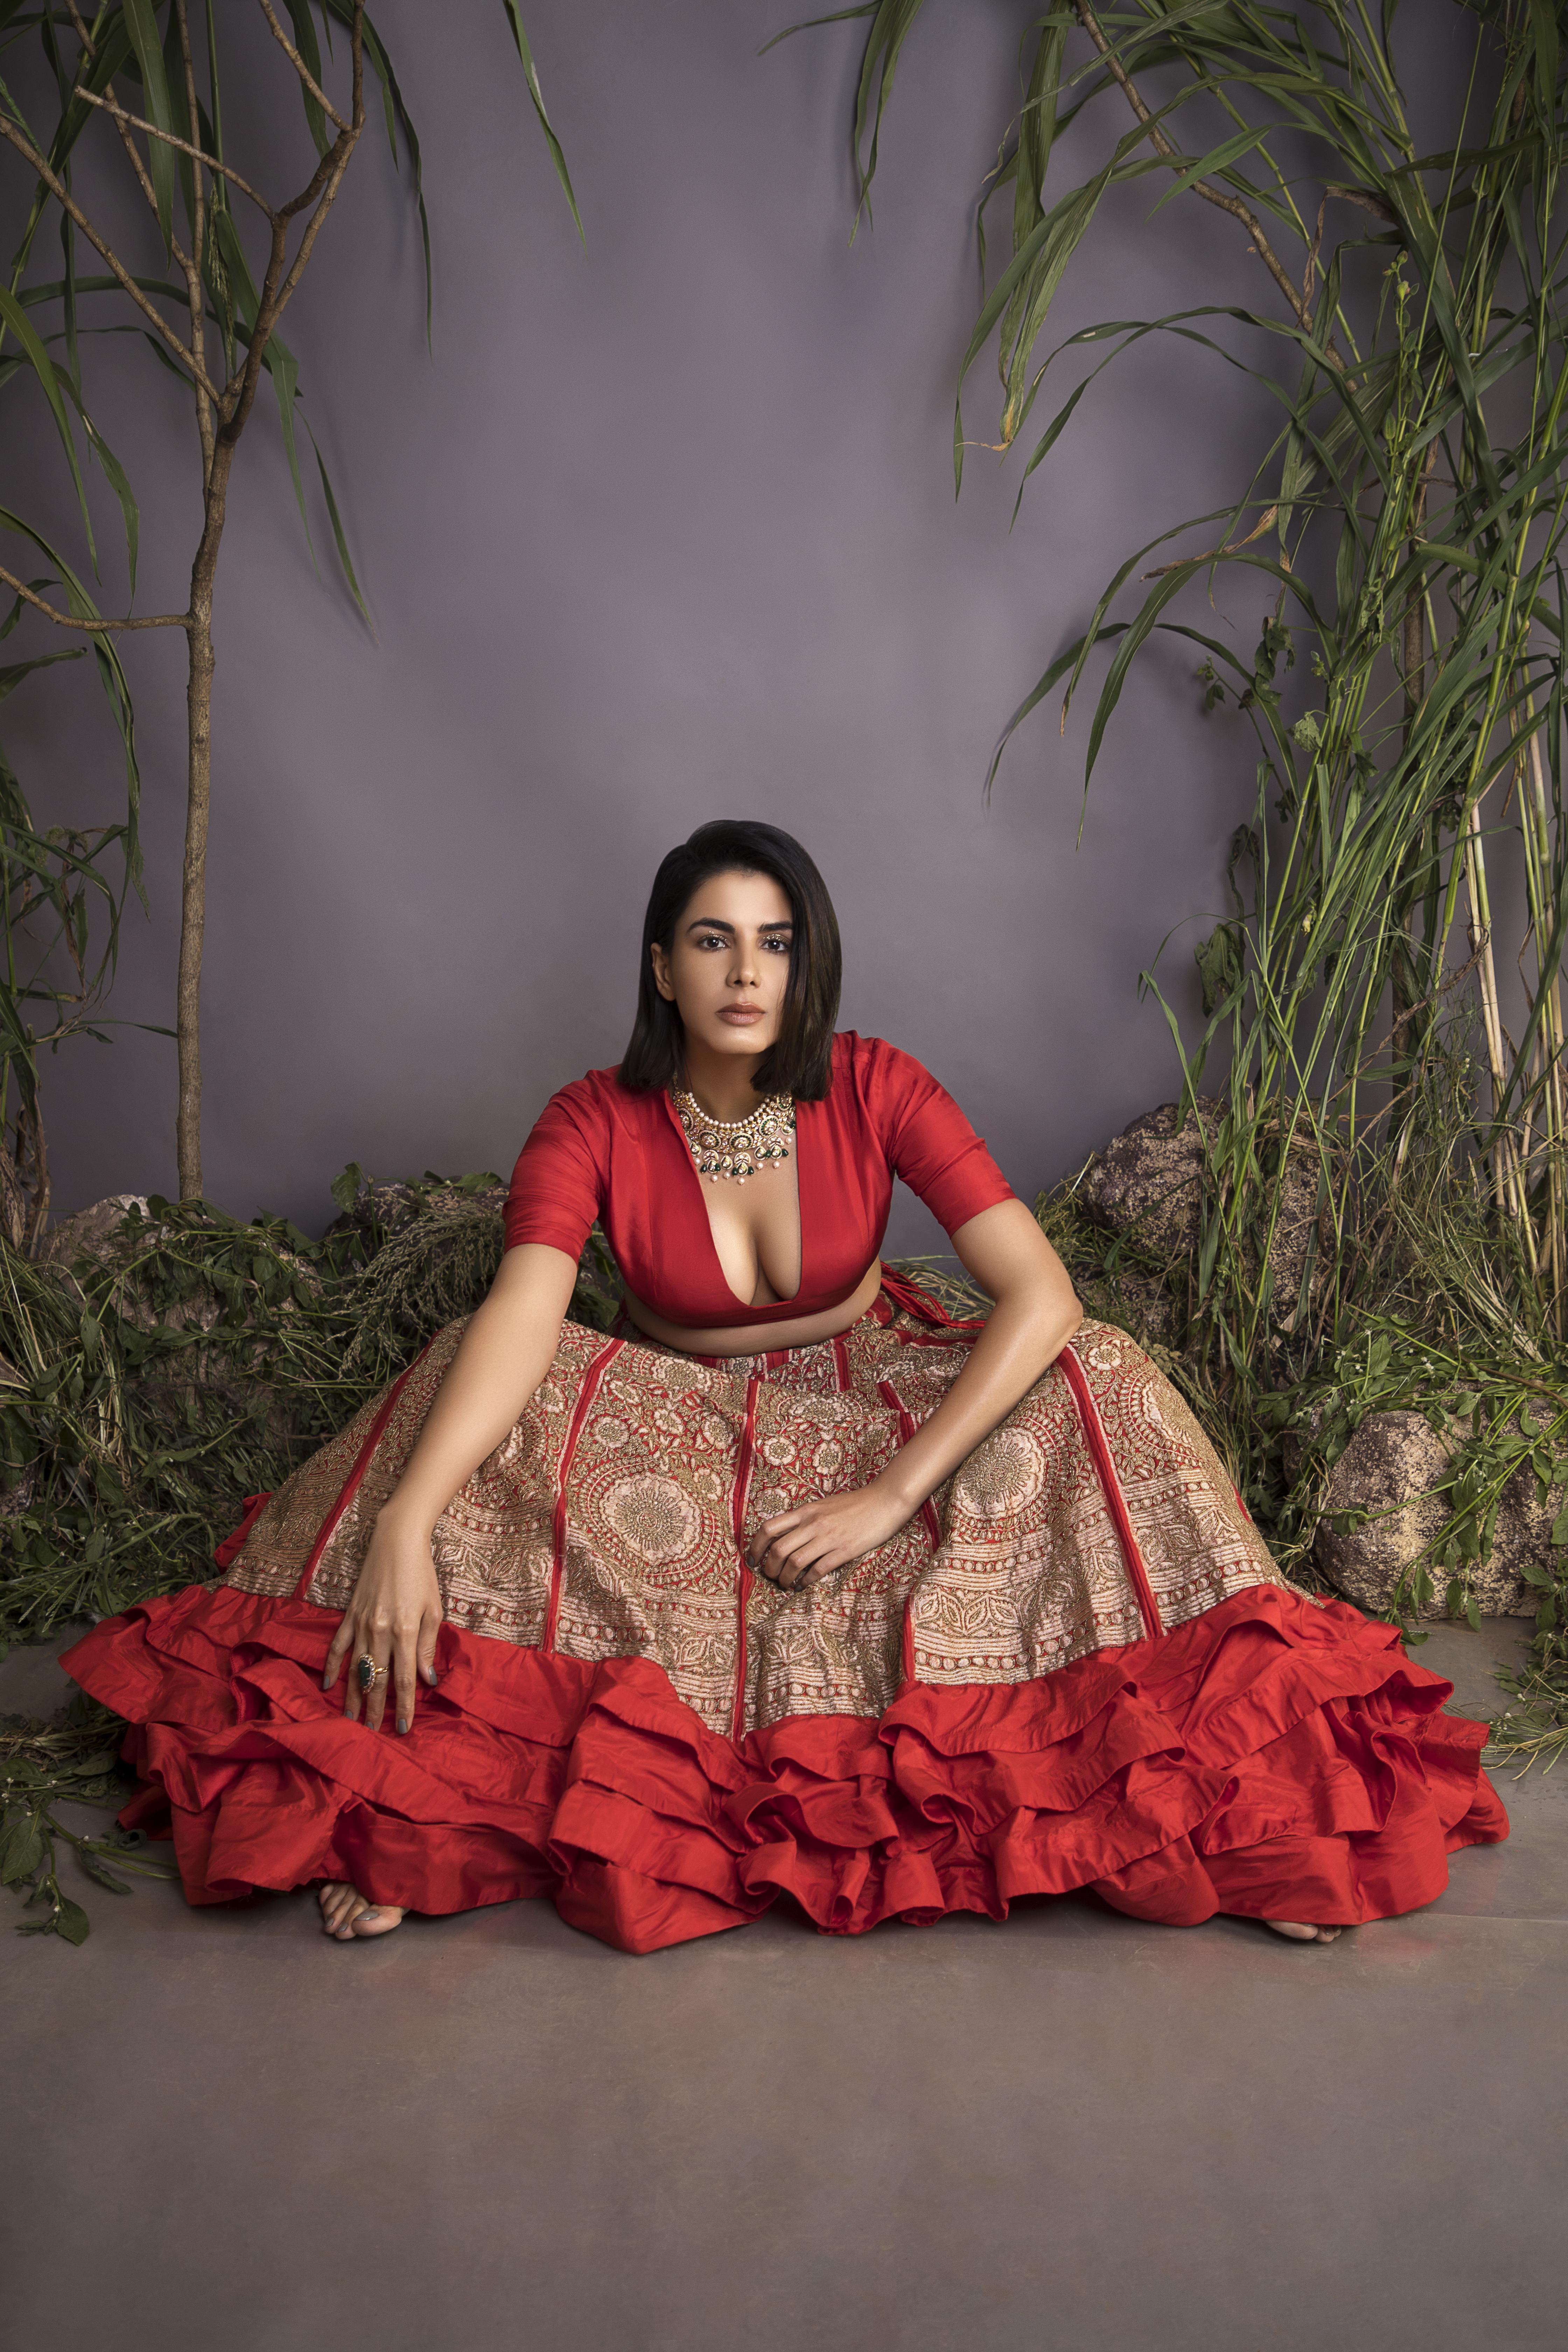 People 4480x6720 Bollywood actresses Kirti Kulhari indian  dress cleavage women actress brunette necklace red tops crop top skirt barefoot sitting plants gray background studio